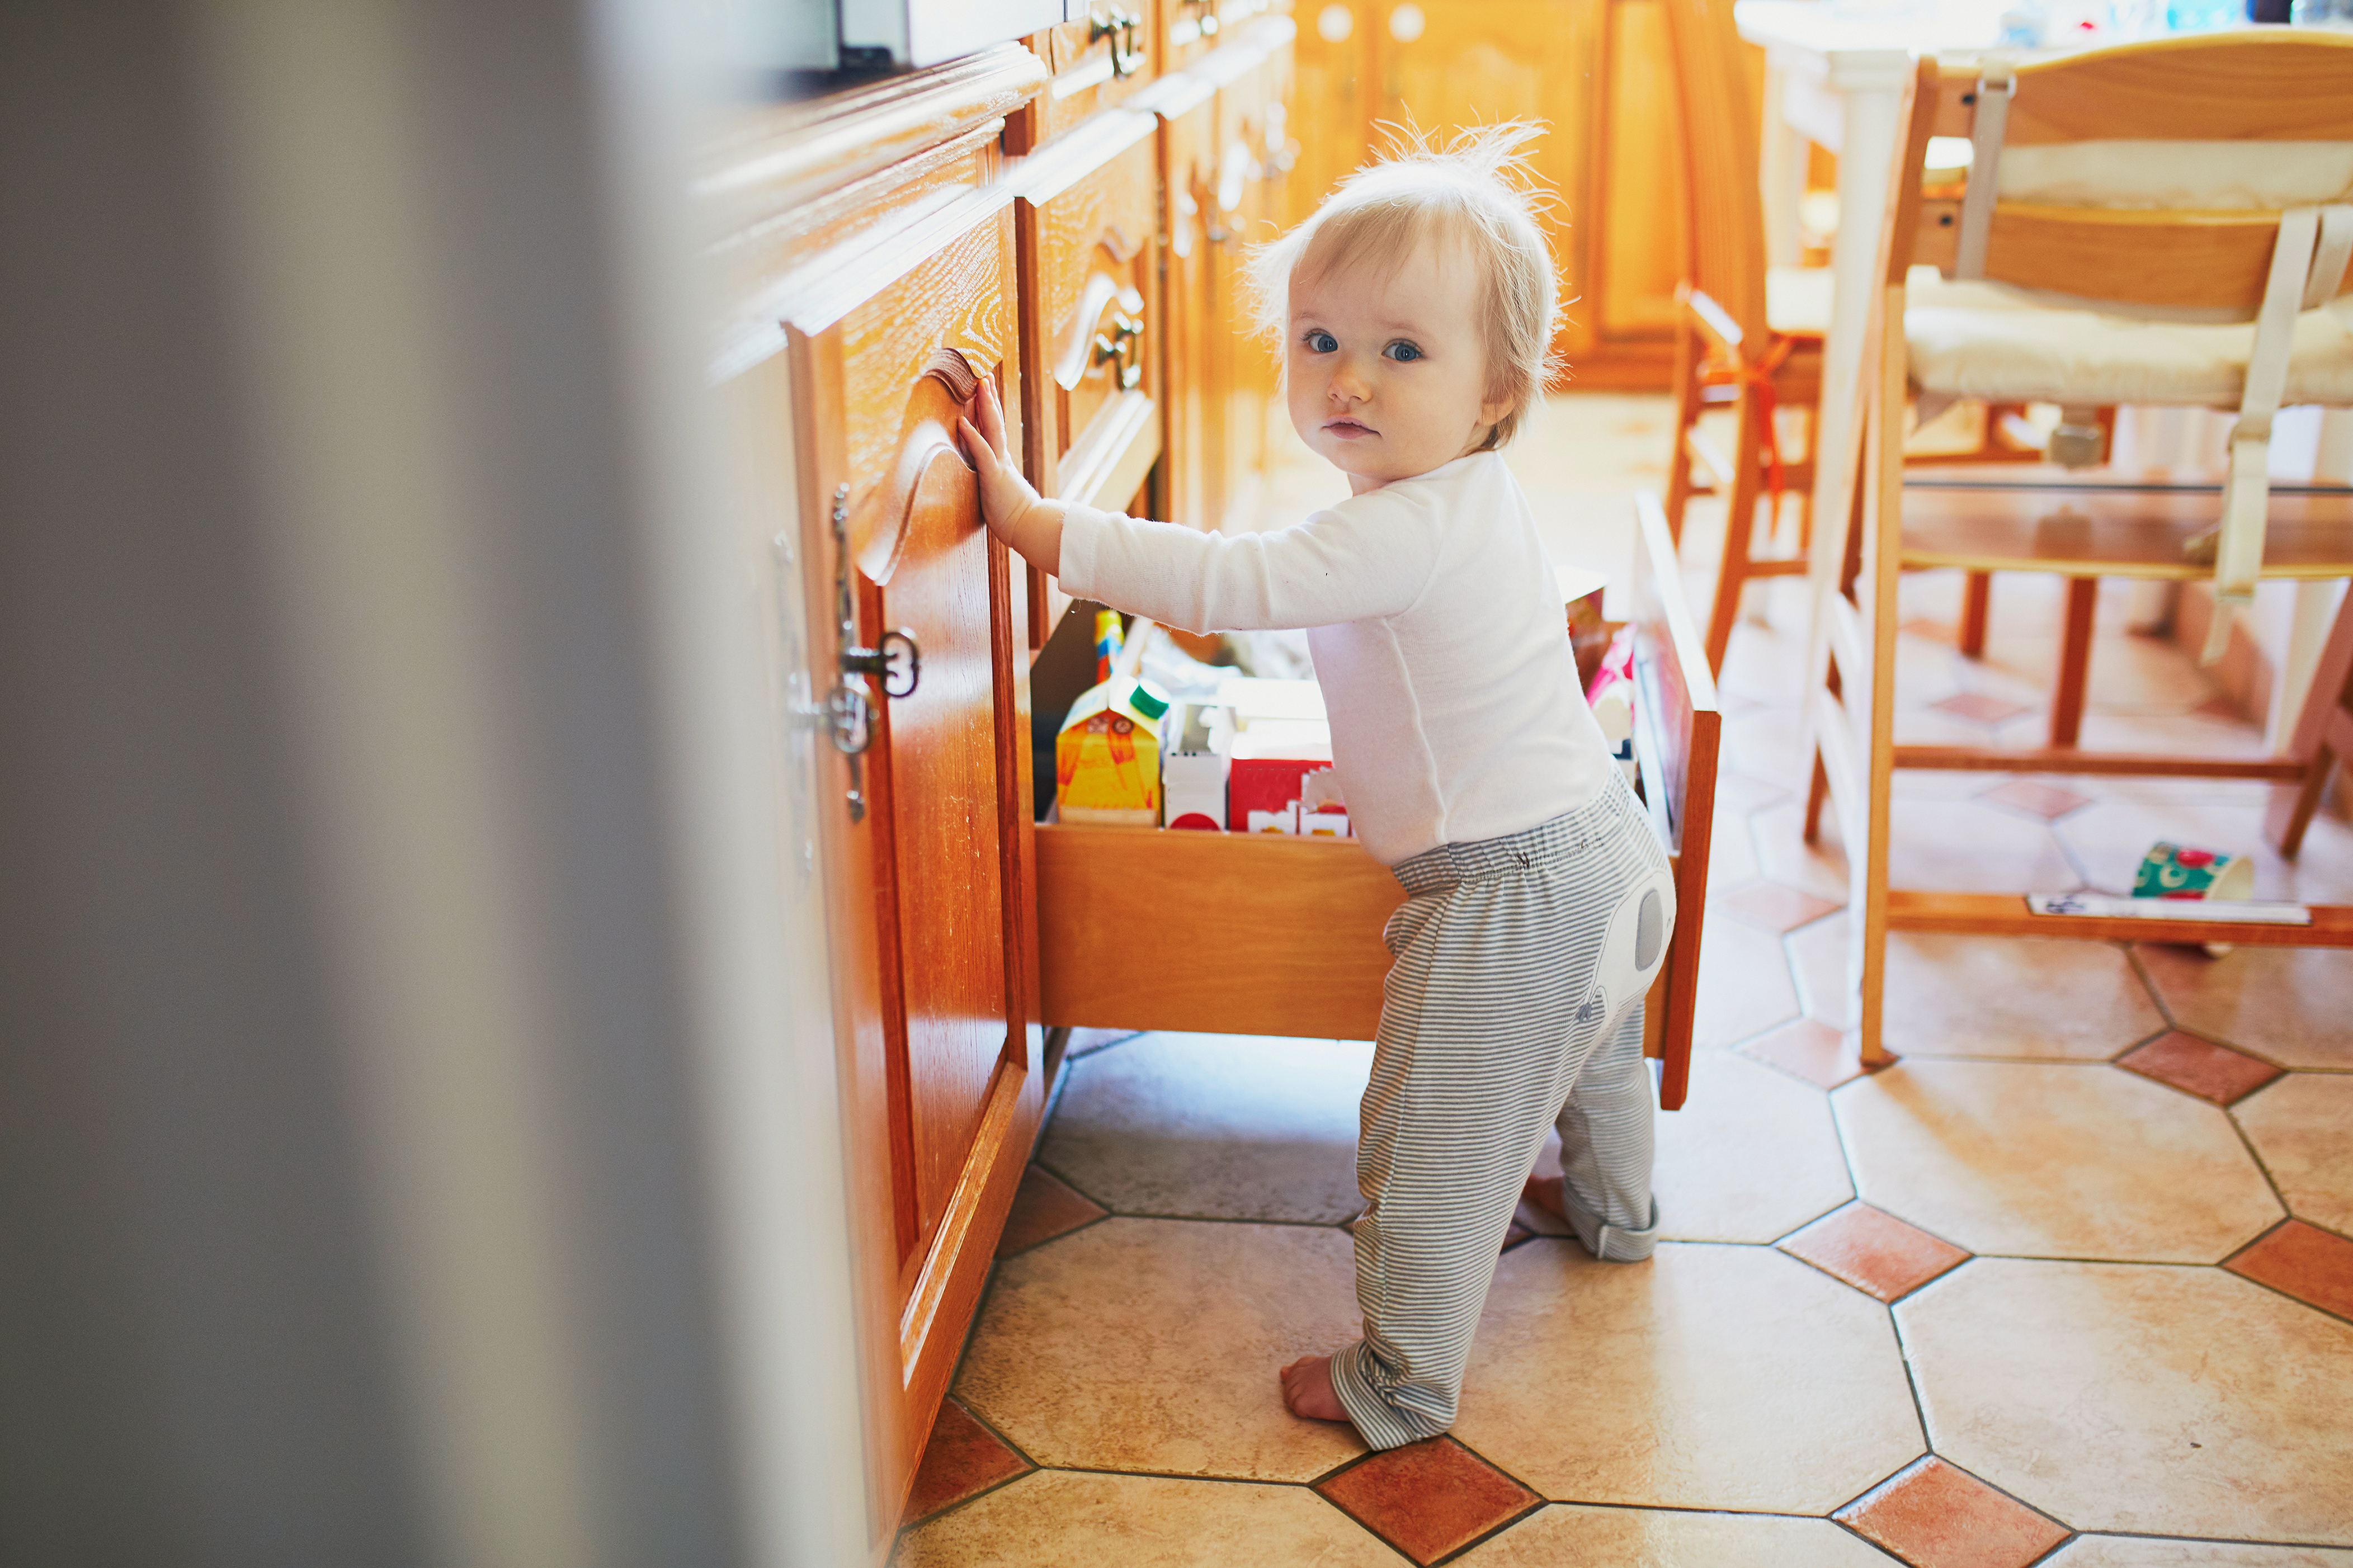 Toddler standing at an open drawer in the kitchen